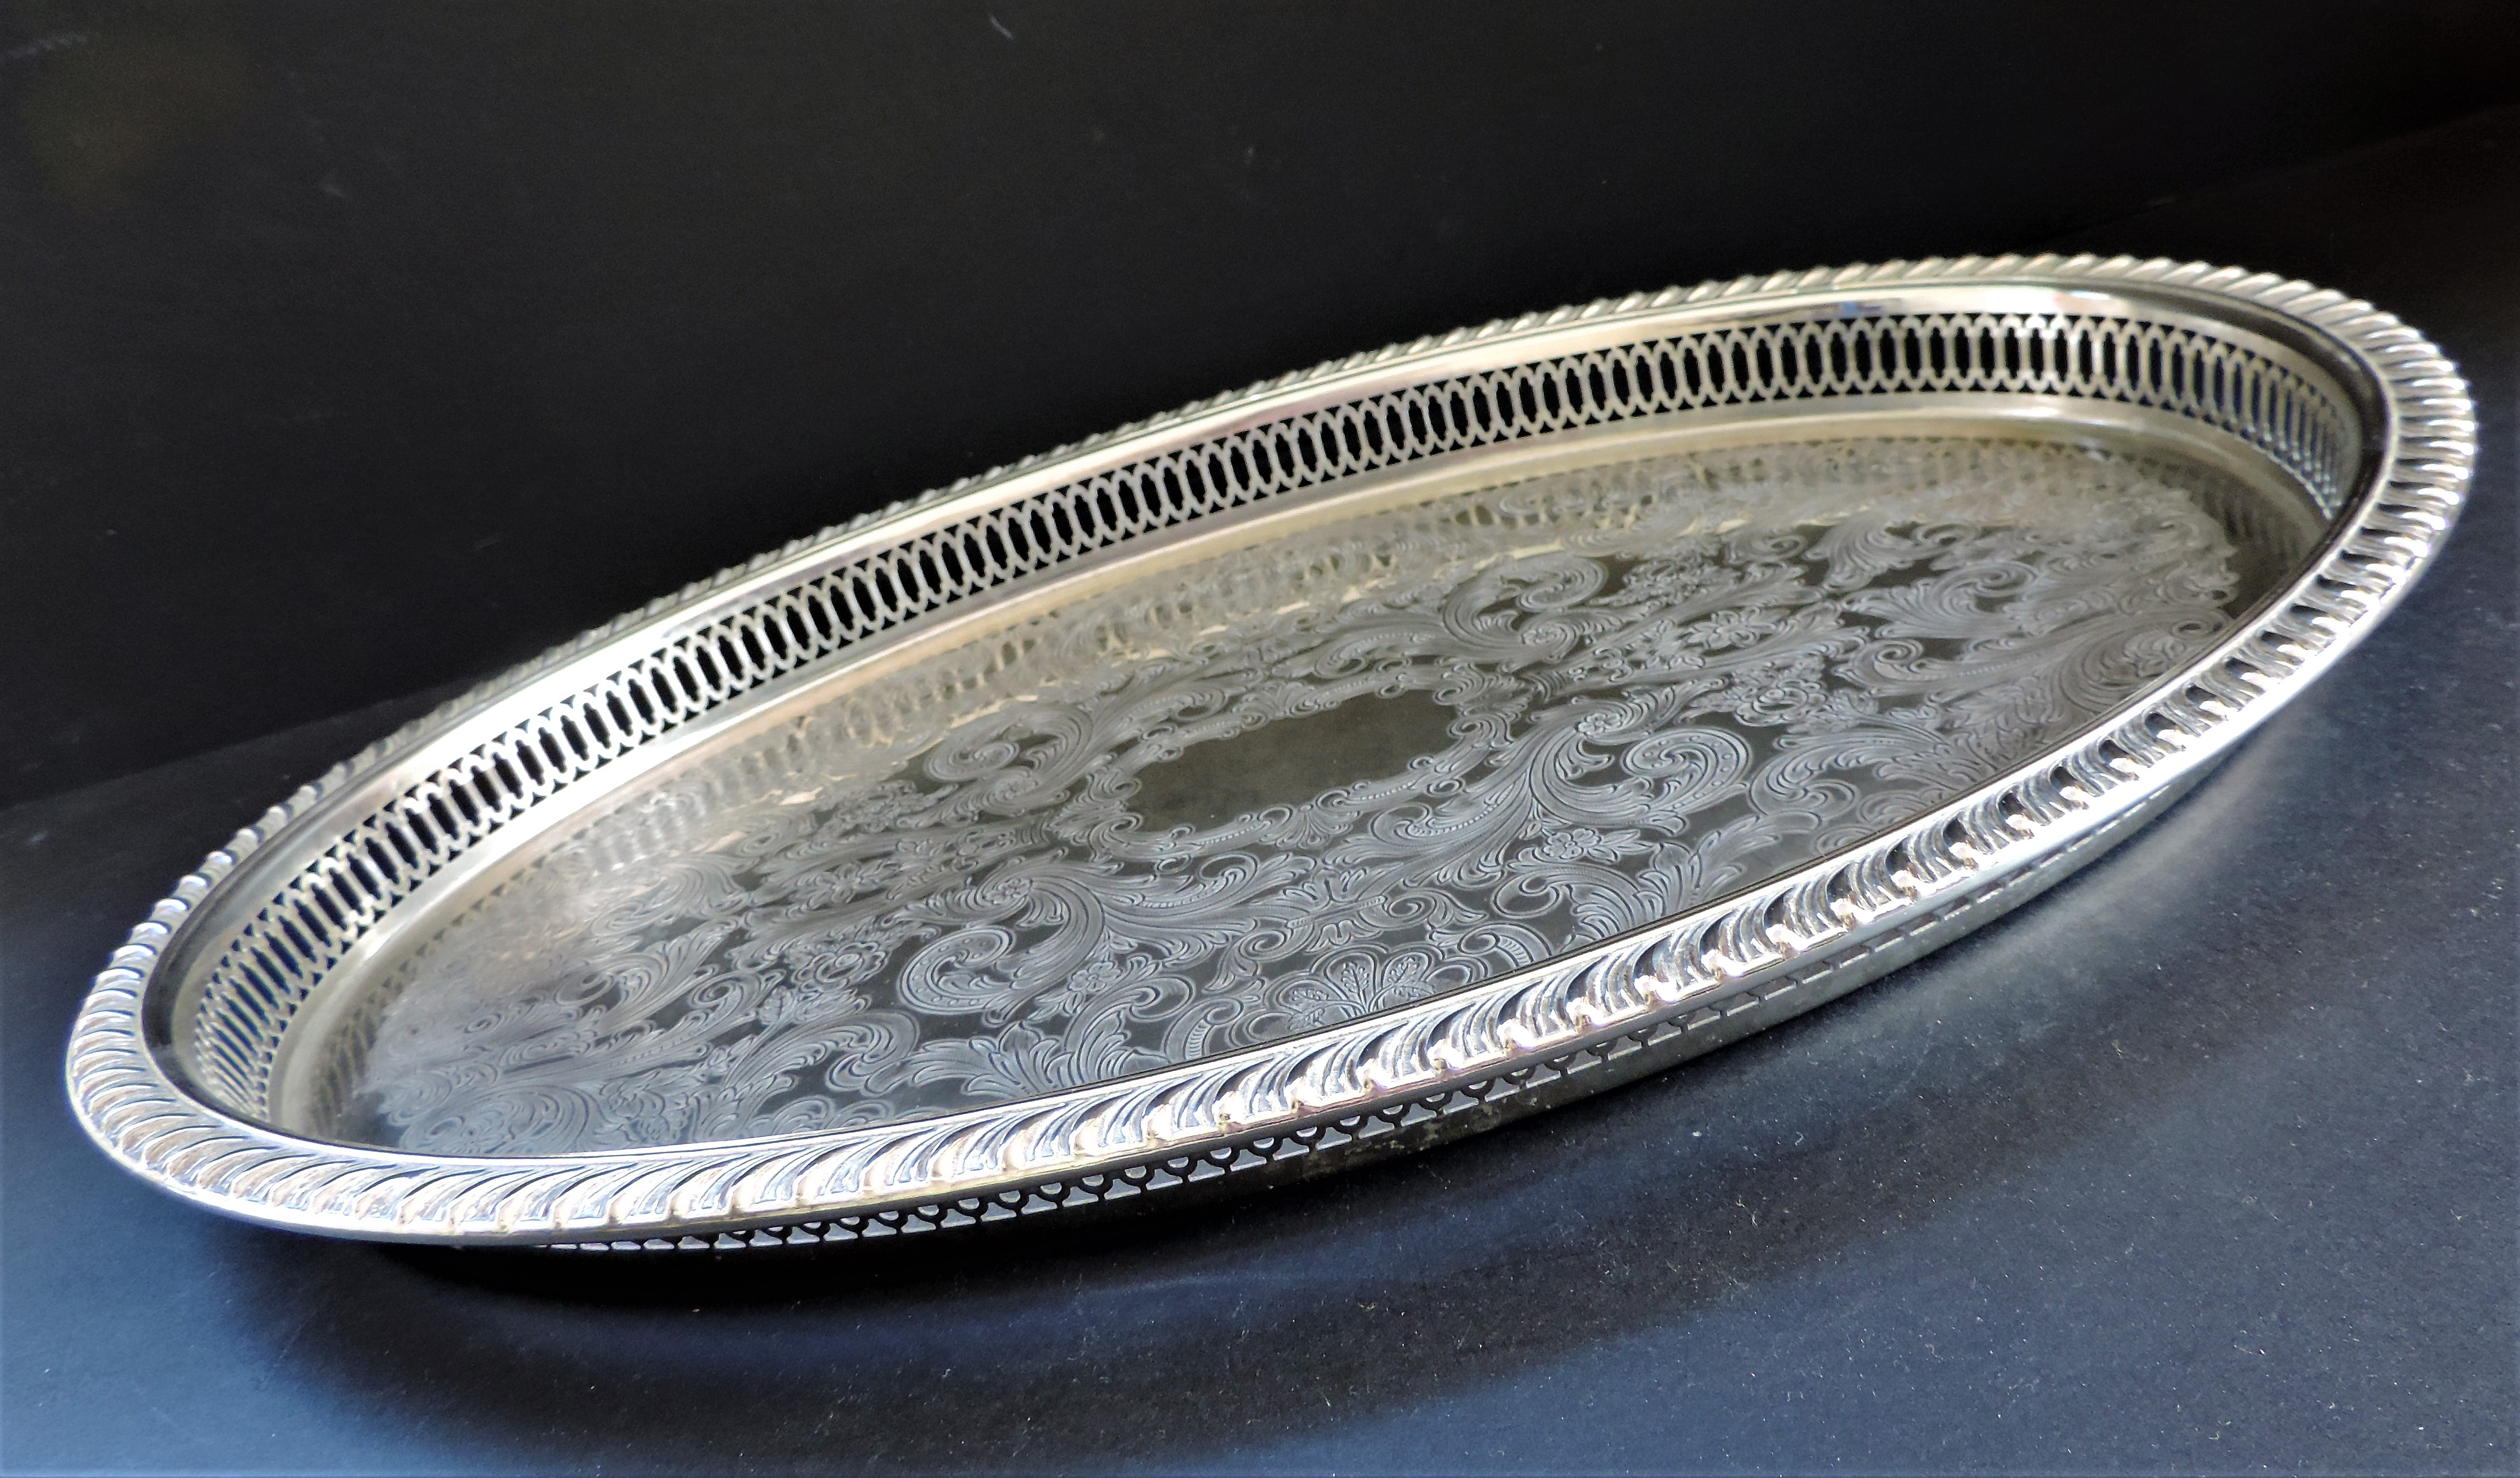 Large Vintage Silver Plated Serving Tray 47cm long - Image 3 of 3